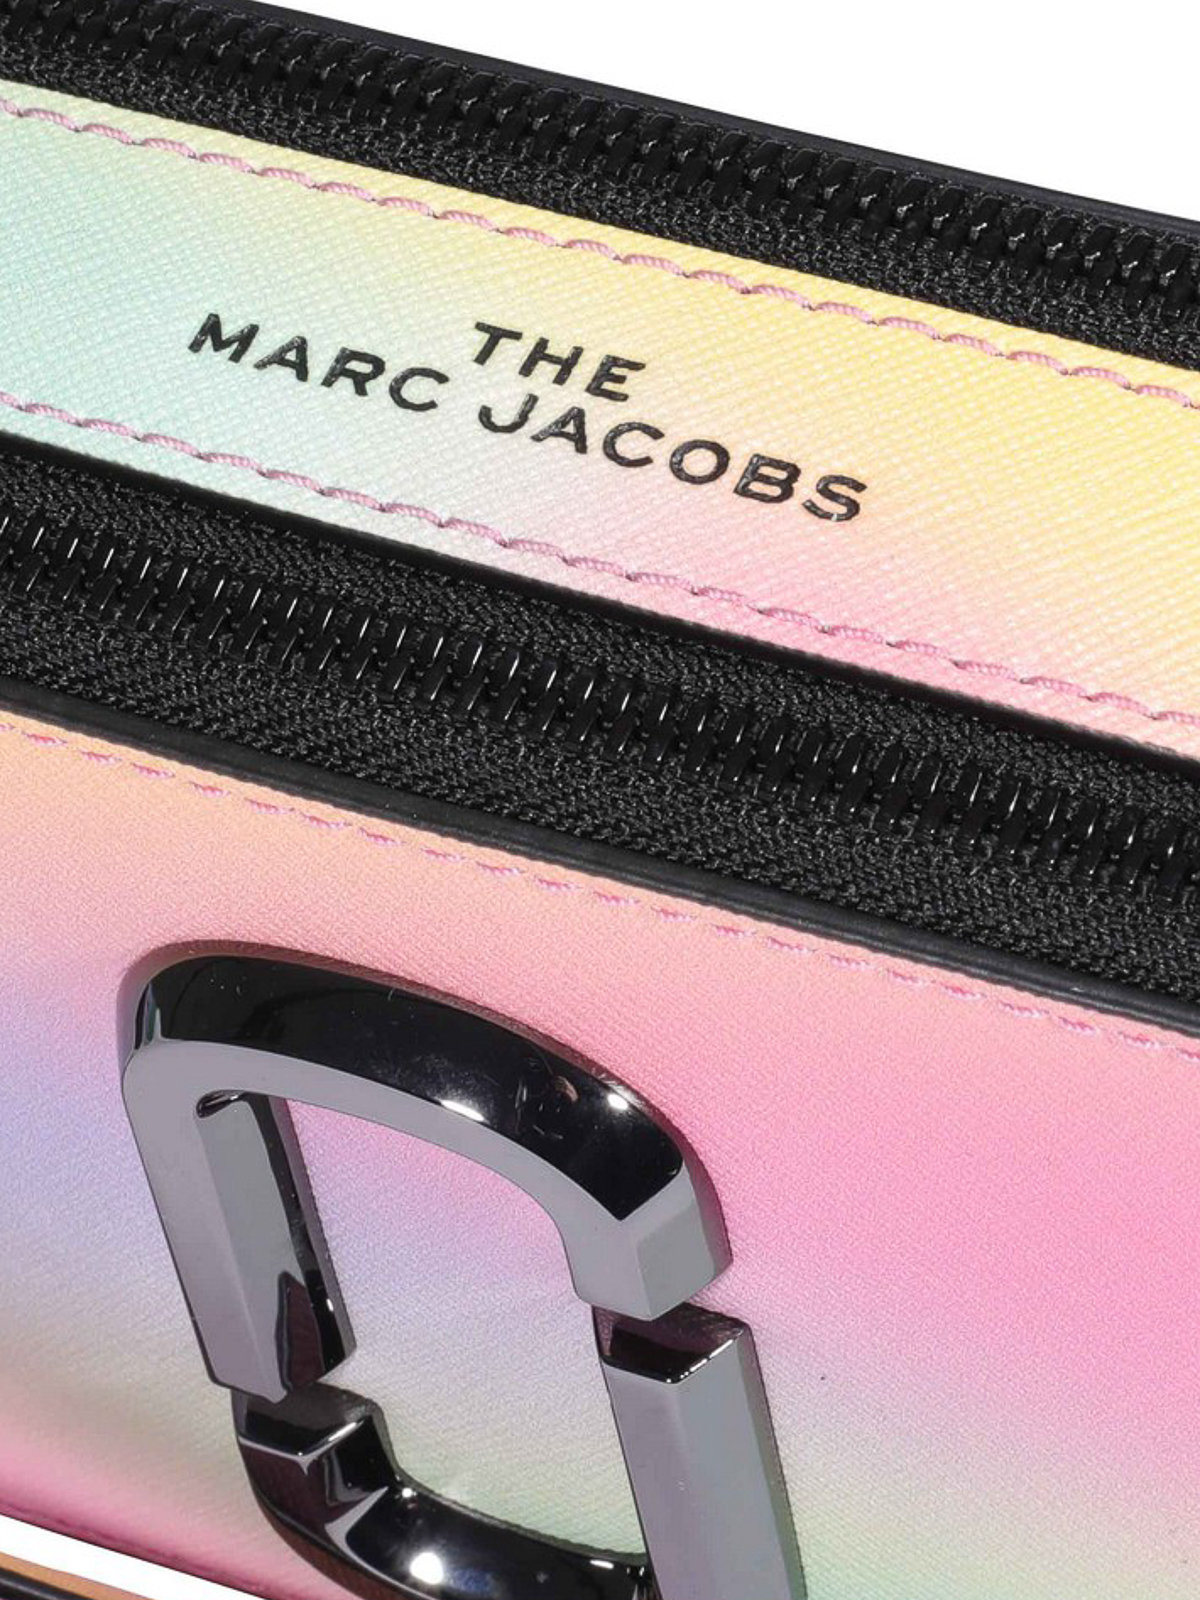 Marc jacobs snapshot airbrush  Marc jacobs leather, Marc jacobs